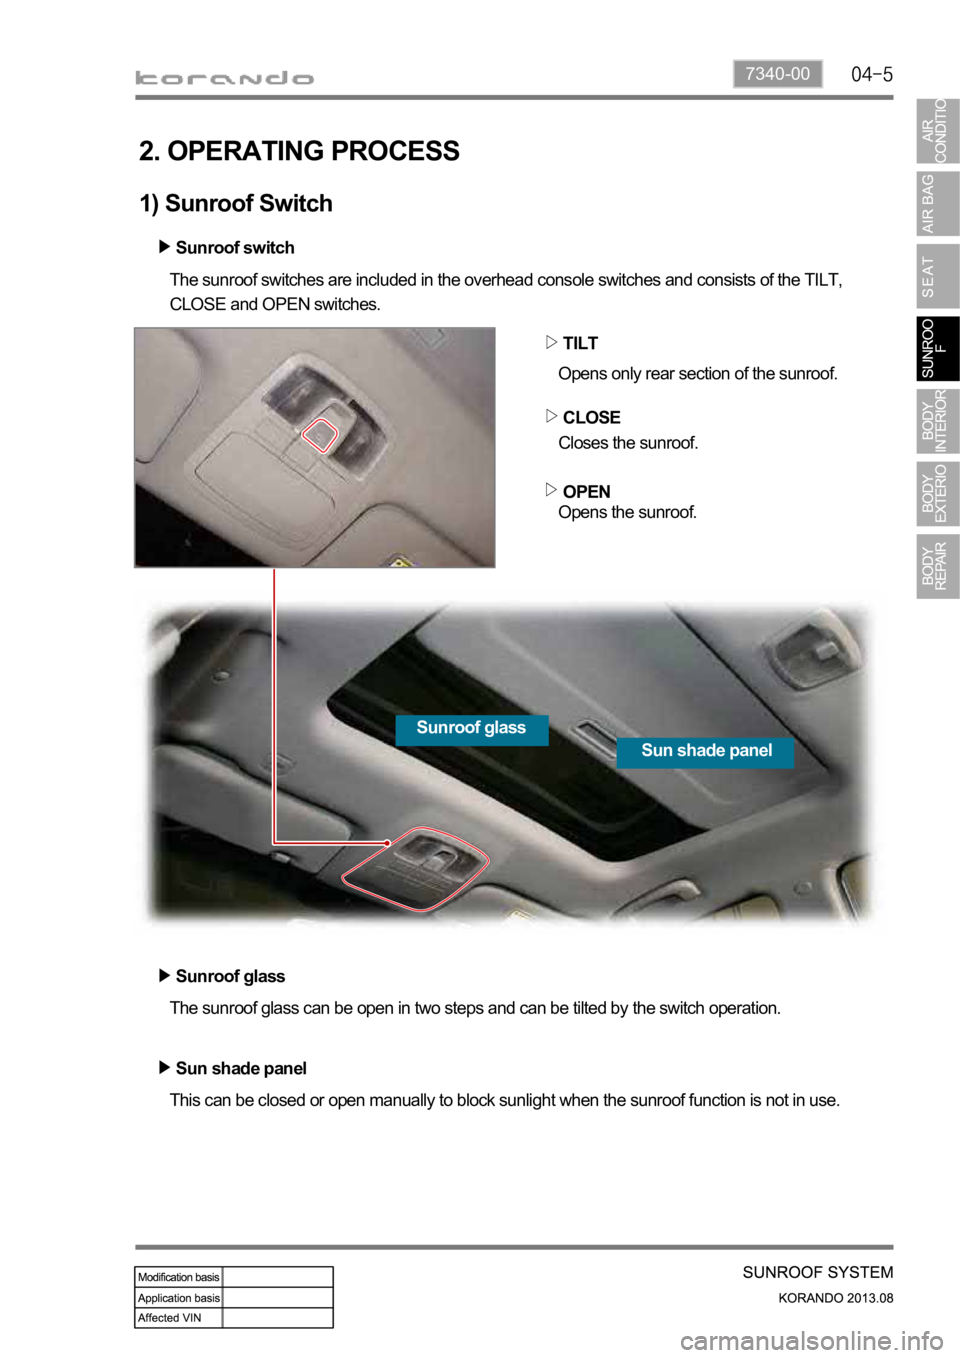 SSANGYONG KORANDO 2013 User Guide 7340-00
2. OPERATING PROCESS
1) Sunroof Switch
This can be closed or open manually to block sunlight when the sunroof function is not in use. The sunroof glass can be open in two steps and can be tilt